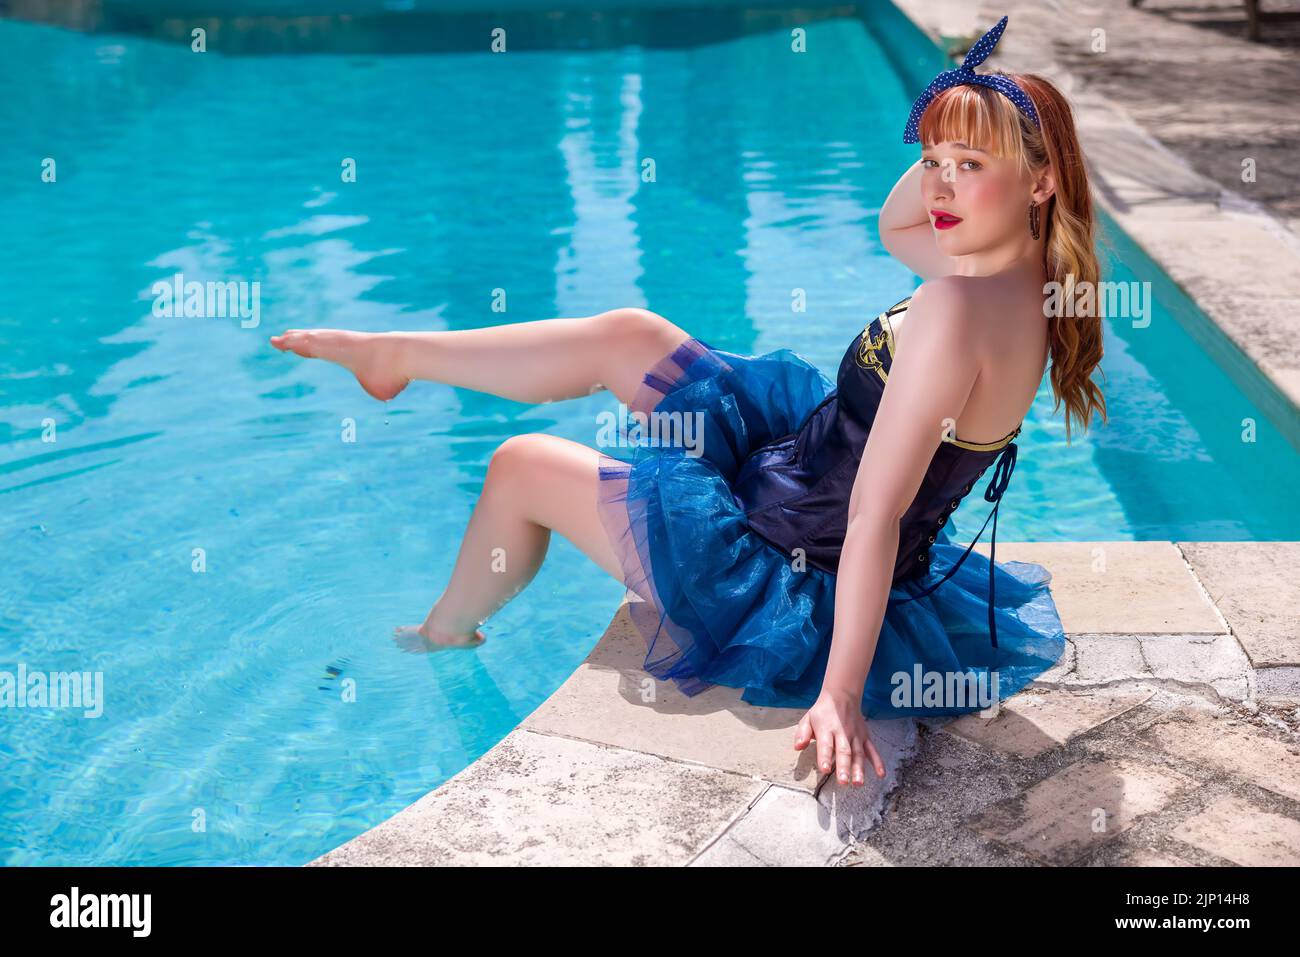 Attractive young woman dressed in a sexy sailor costume as a pinup girl on the edge of a swimming pool Stock Photo